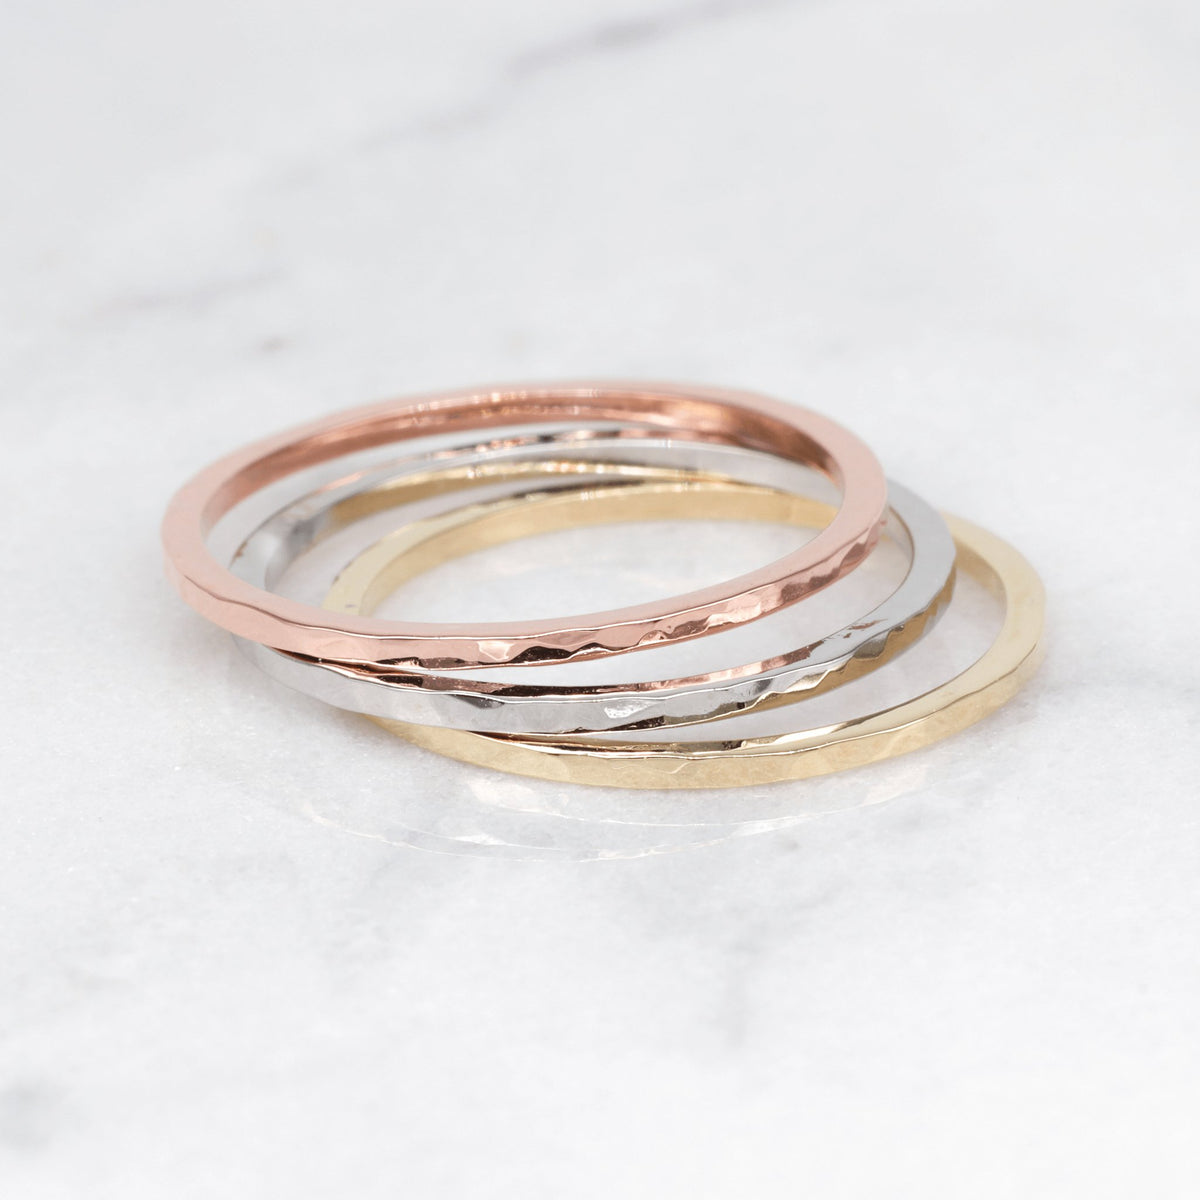 Hammered Stackable Rings in Rose White and Yellow Gold